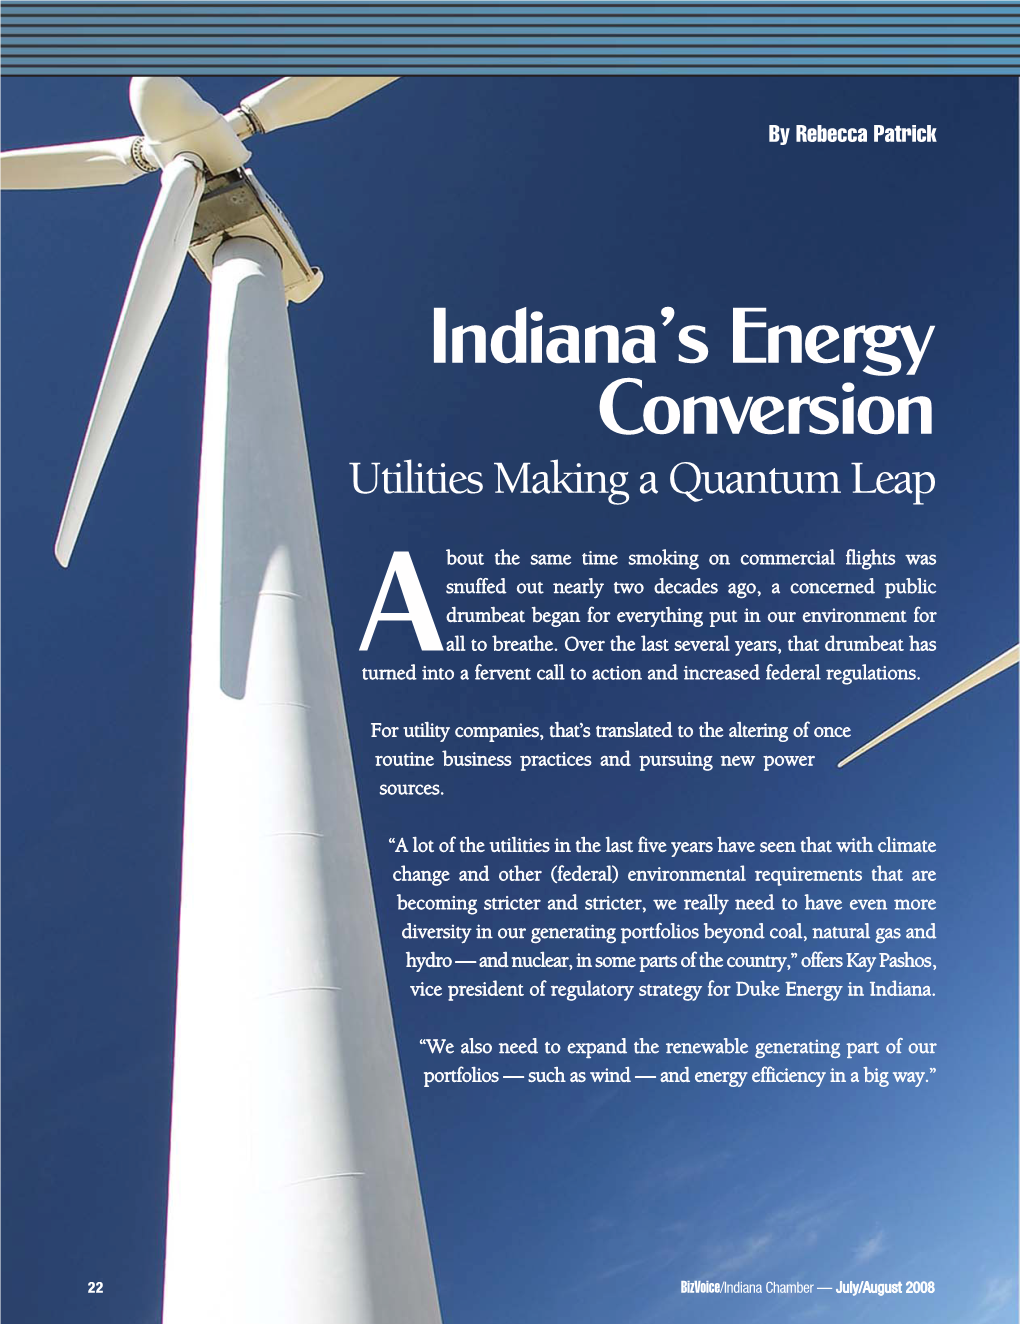 Indiana's Energy Conversion